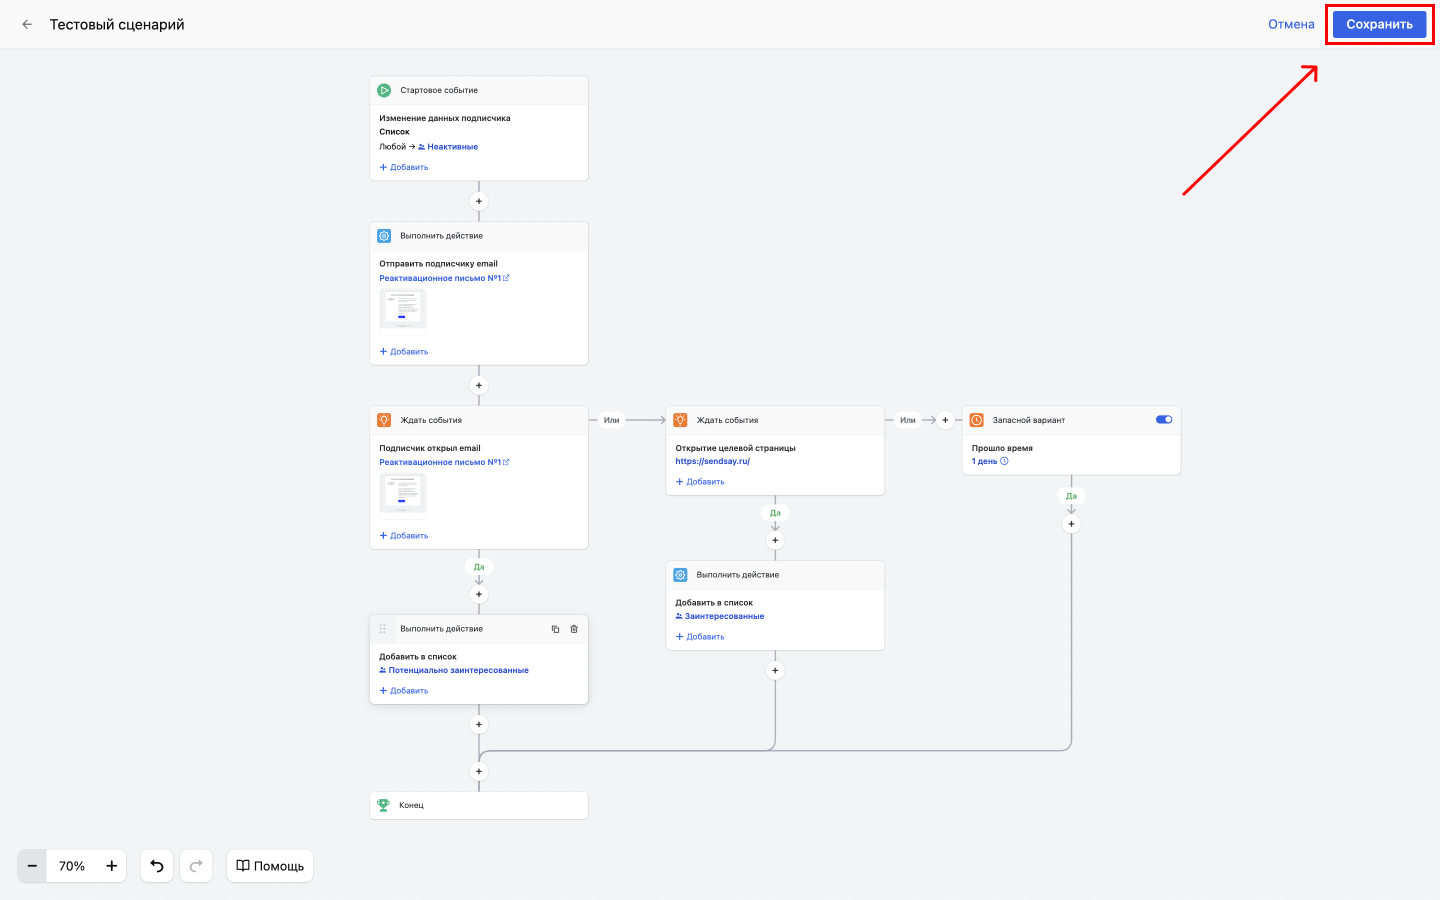 How to save the workflow